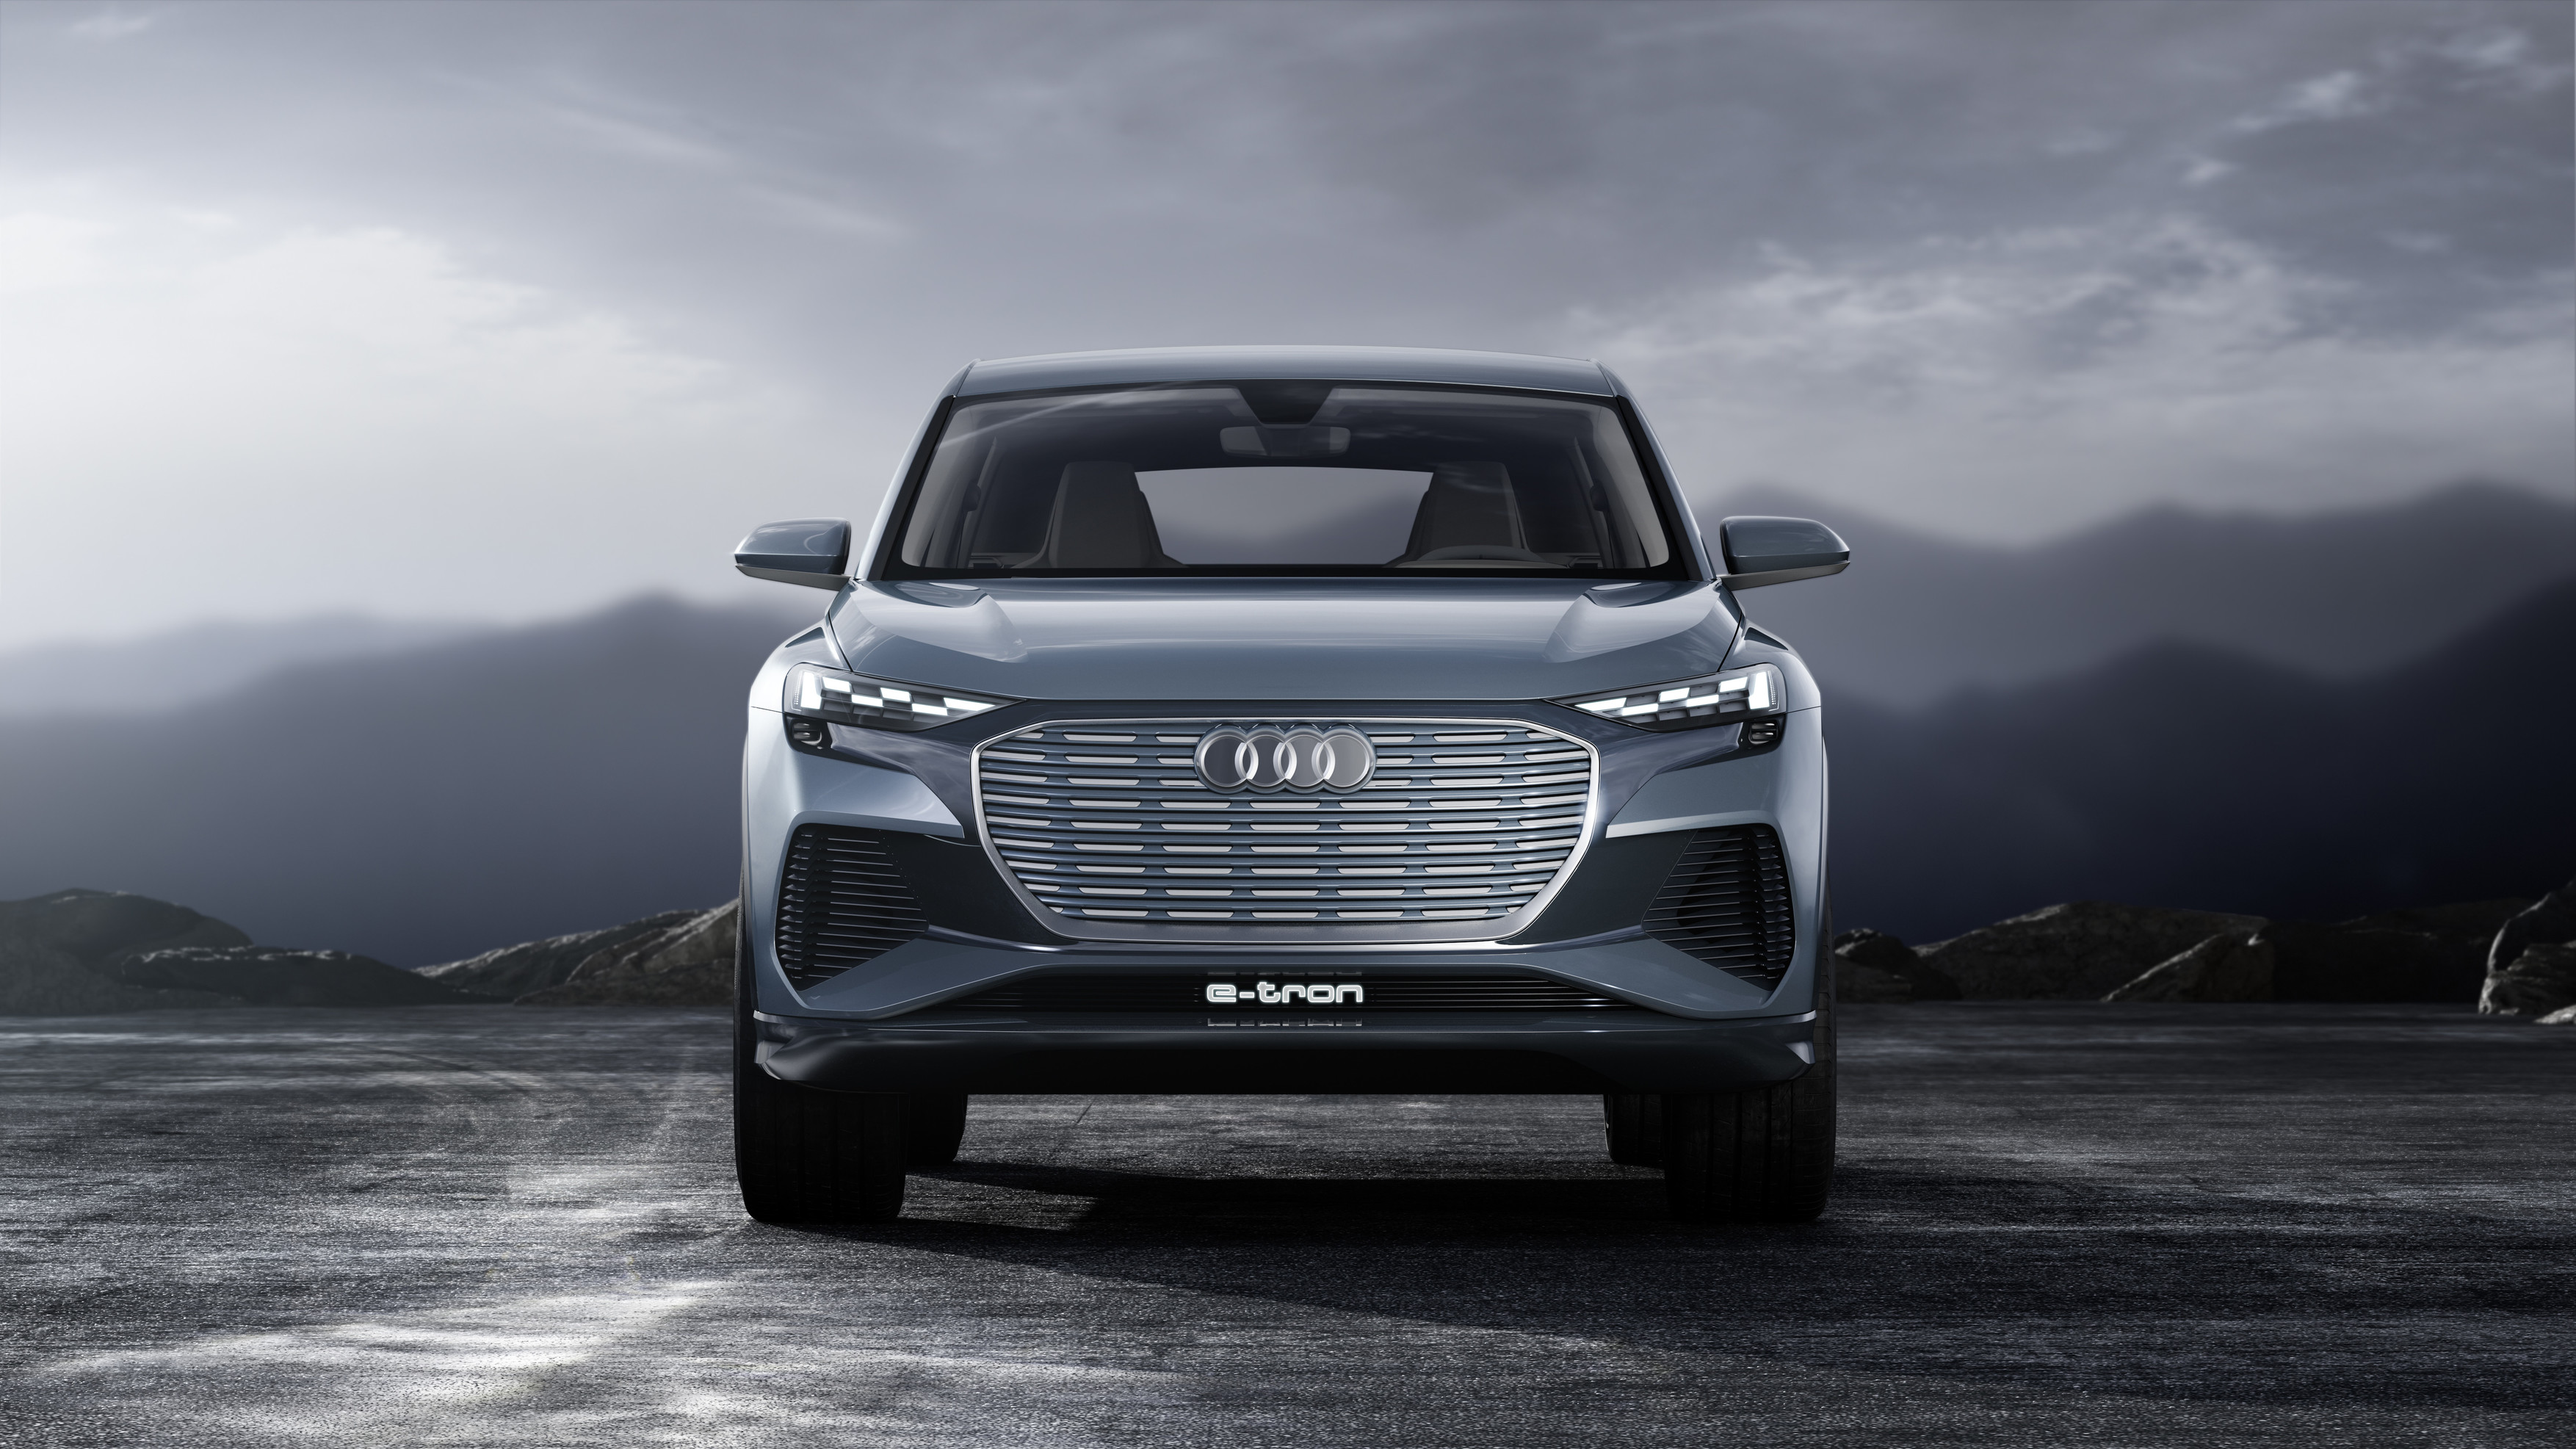 Audi S New Q4 E Tron Concept Is A Compact Electric Crossover With 280 Miles Of Range Internet Technology News - moto de tron roblox